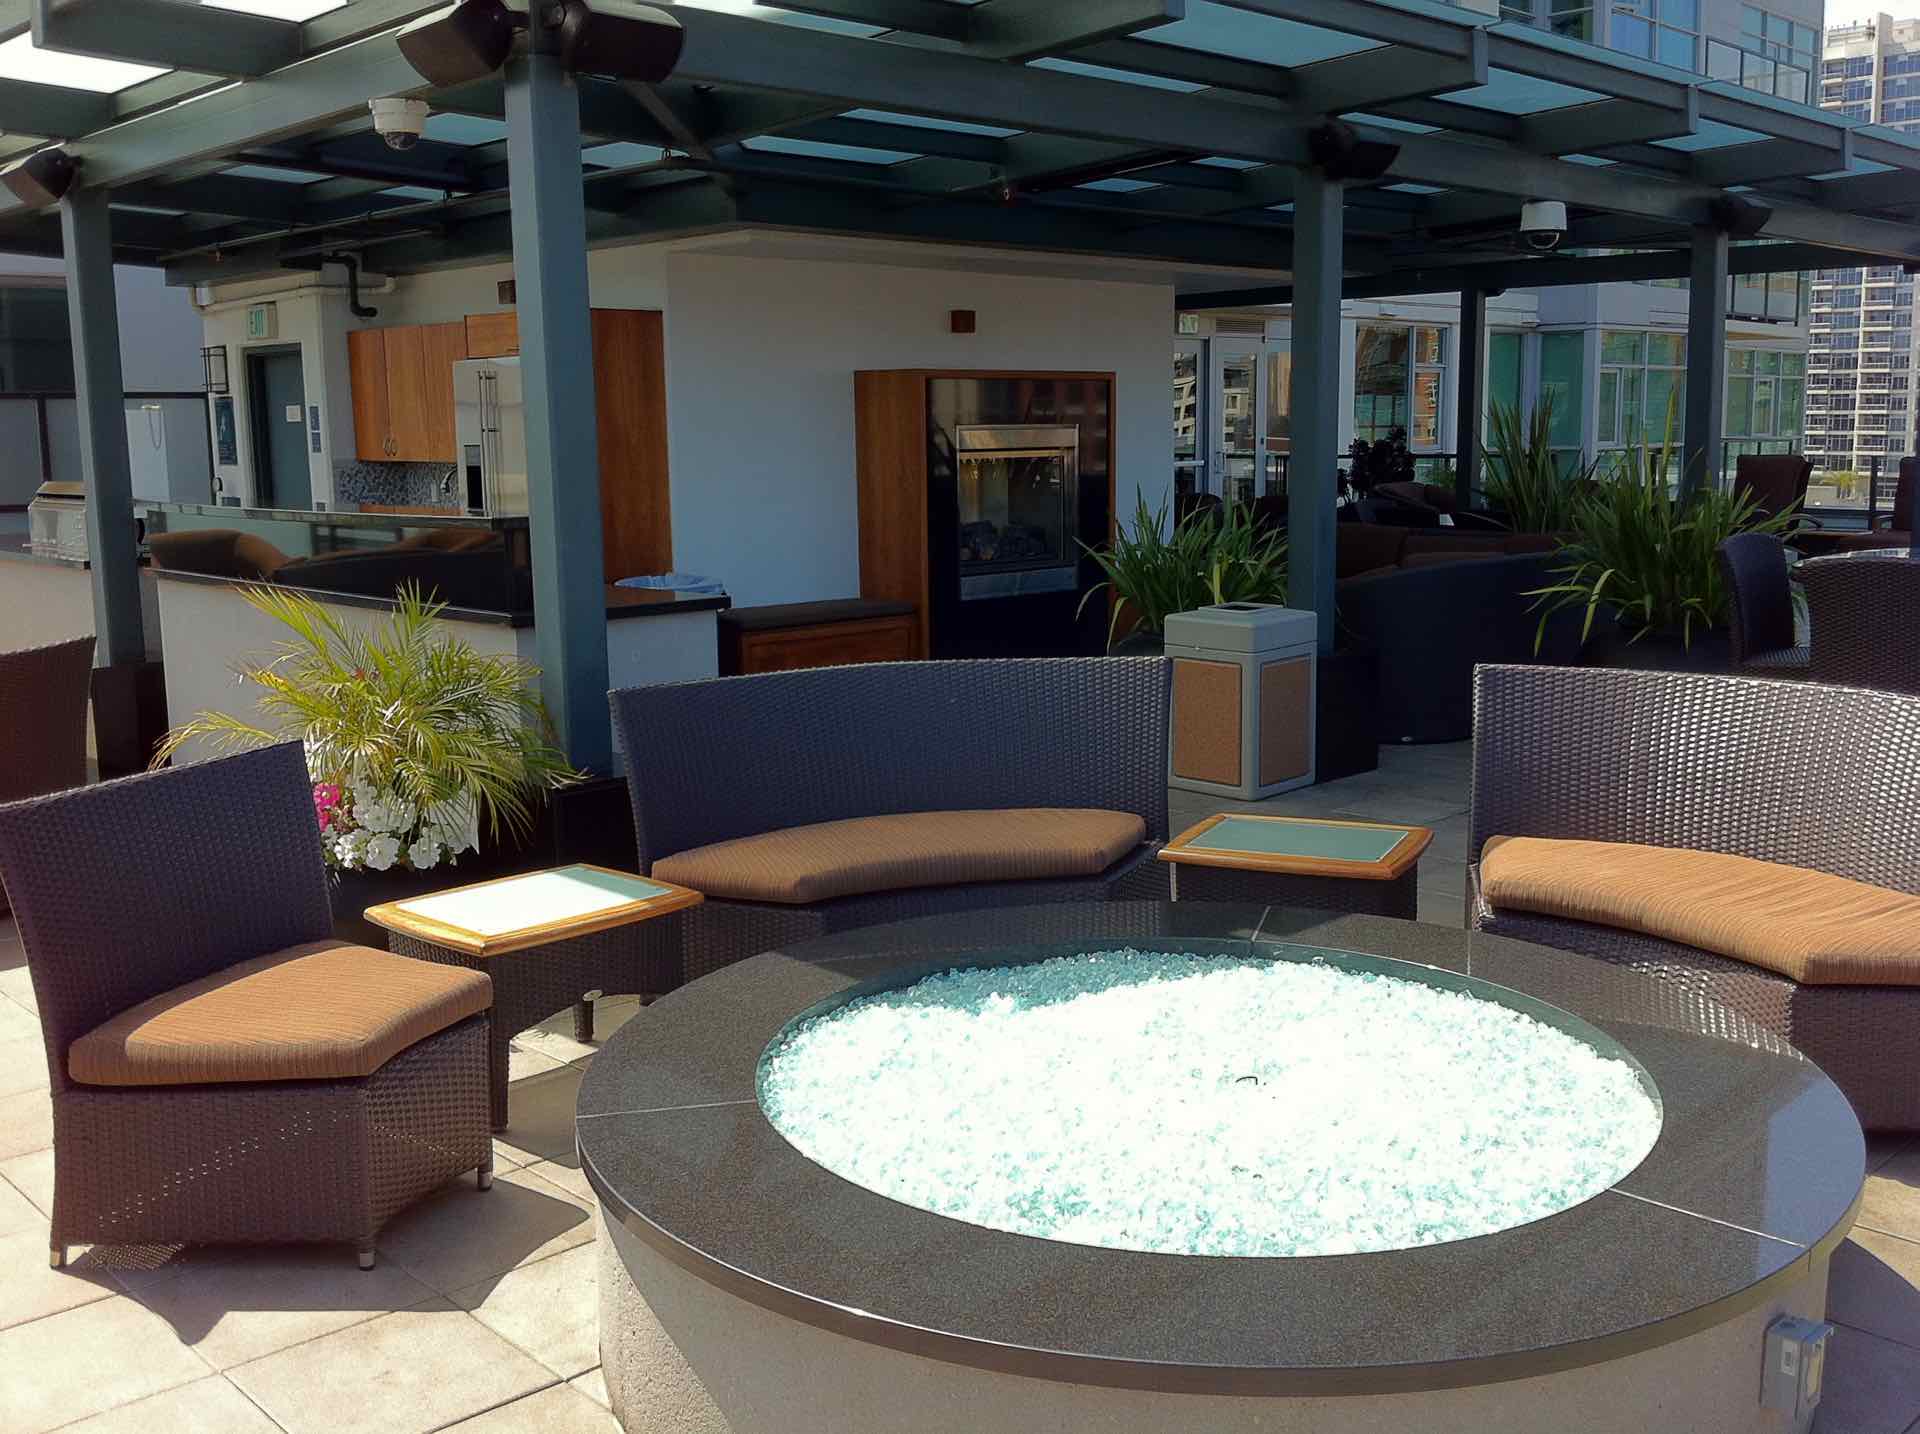 Fire pit area in community lounge of downtown San Diego The Legend condo tower